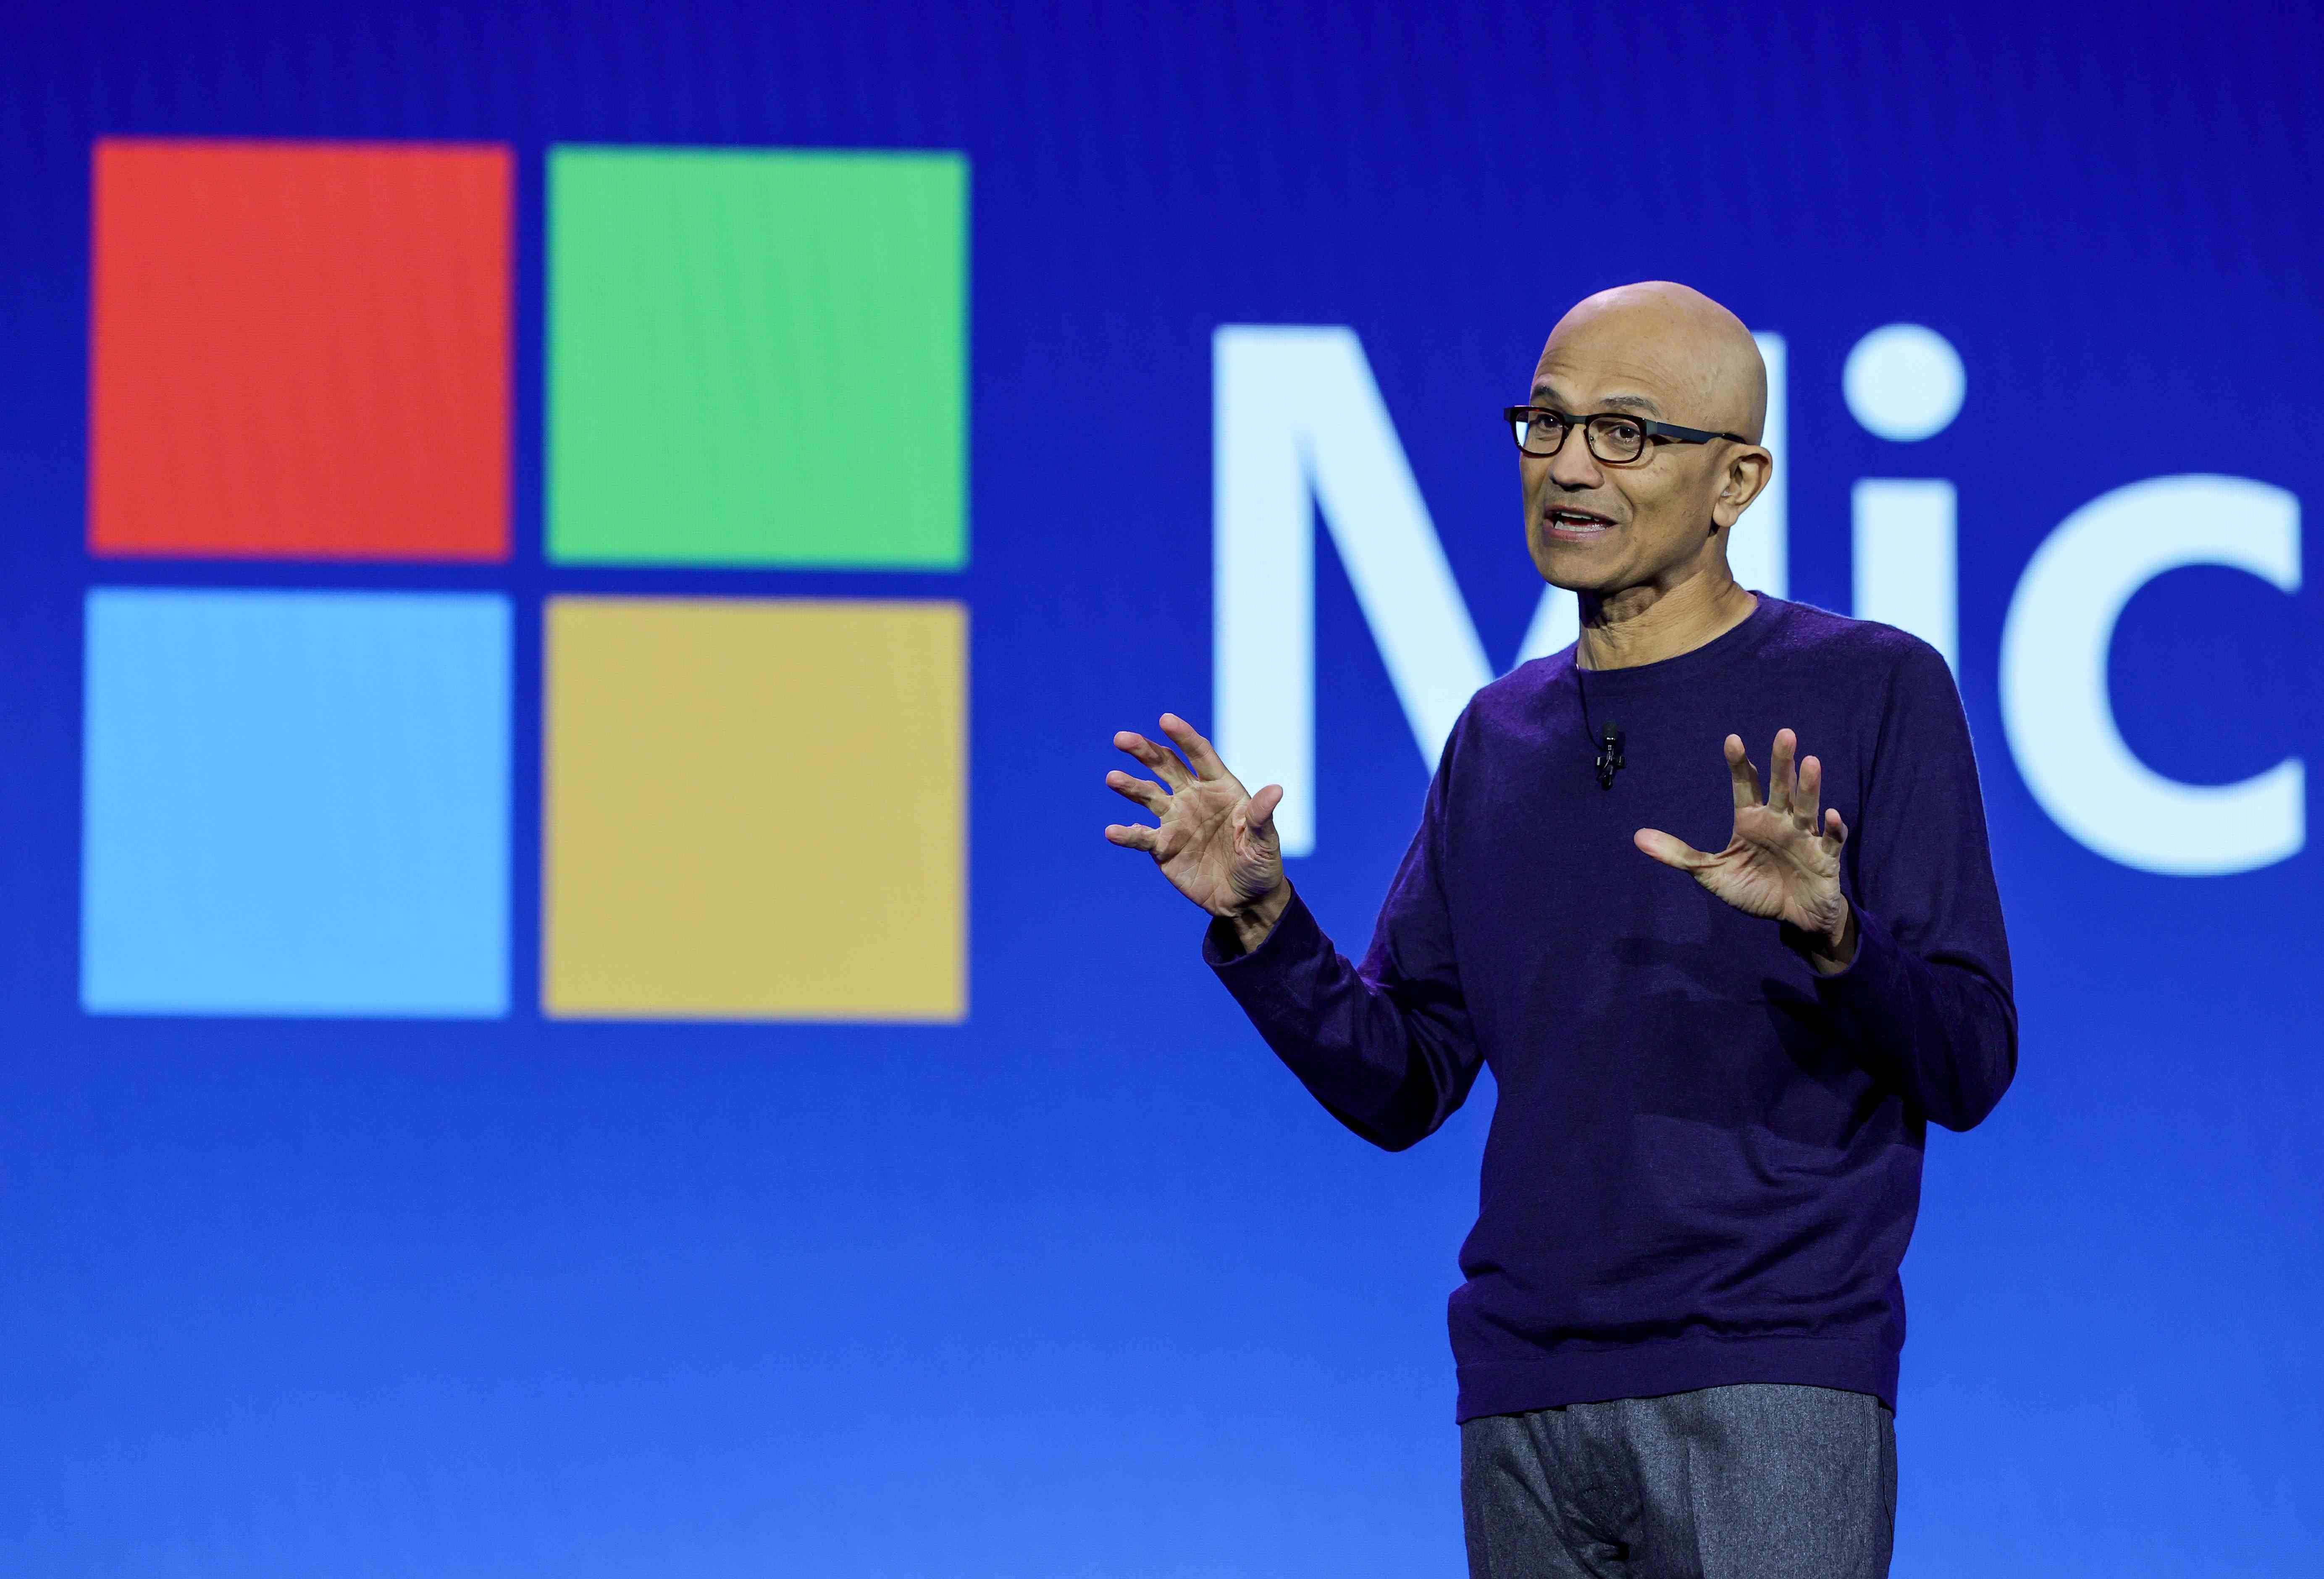 Microsoft CEO and Chairman addressing an audience